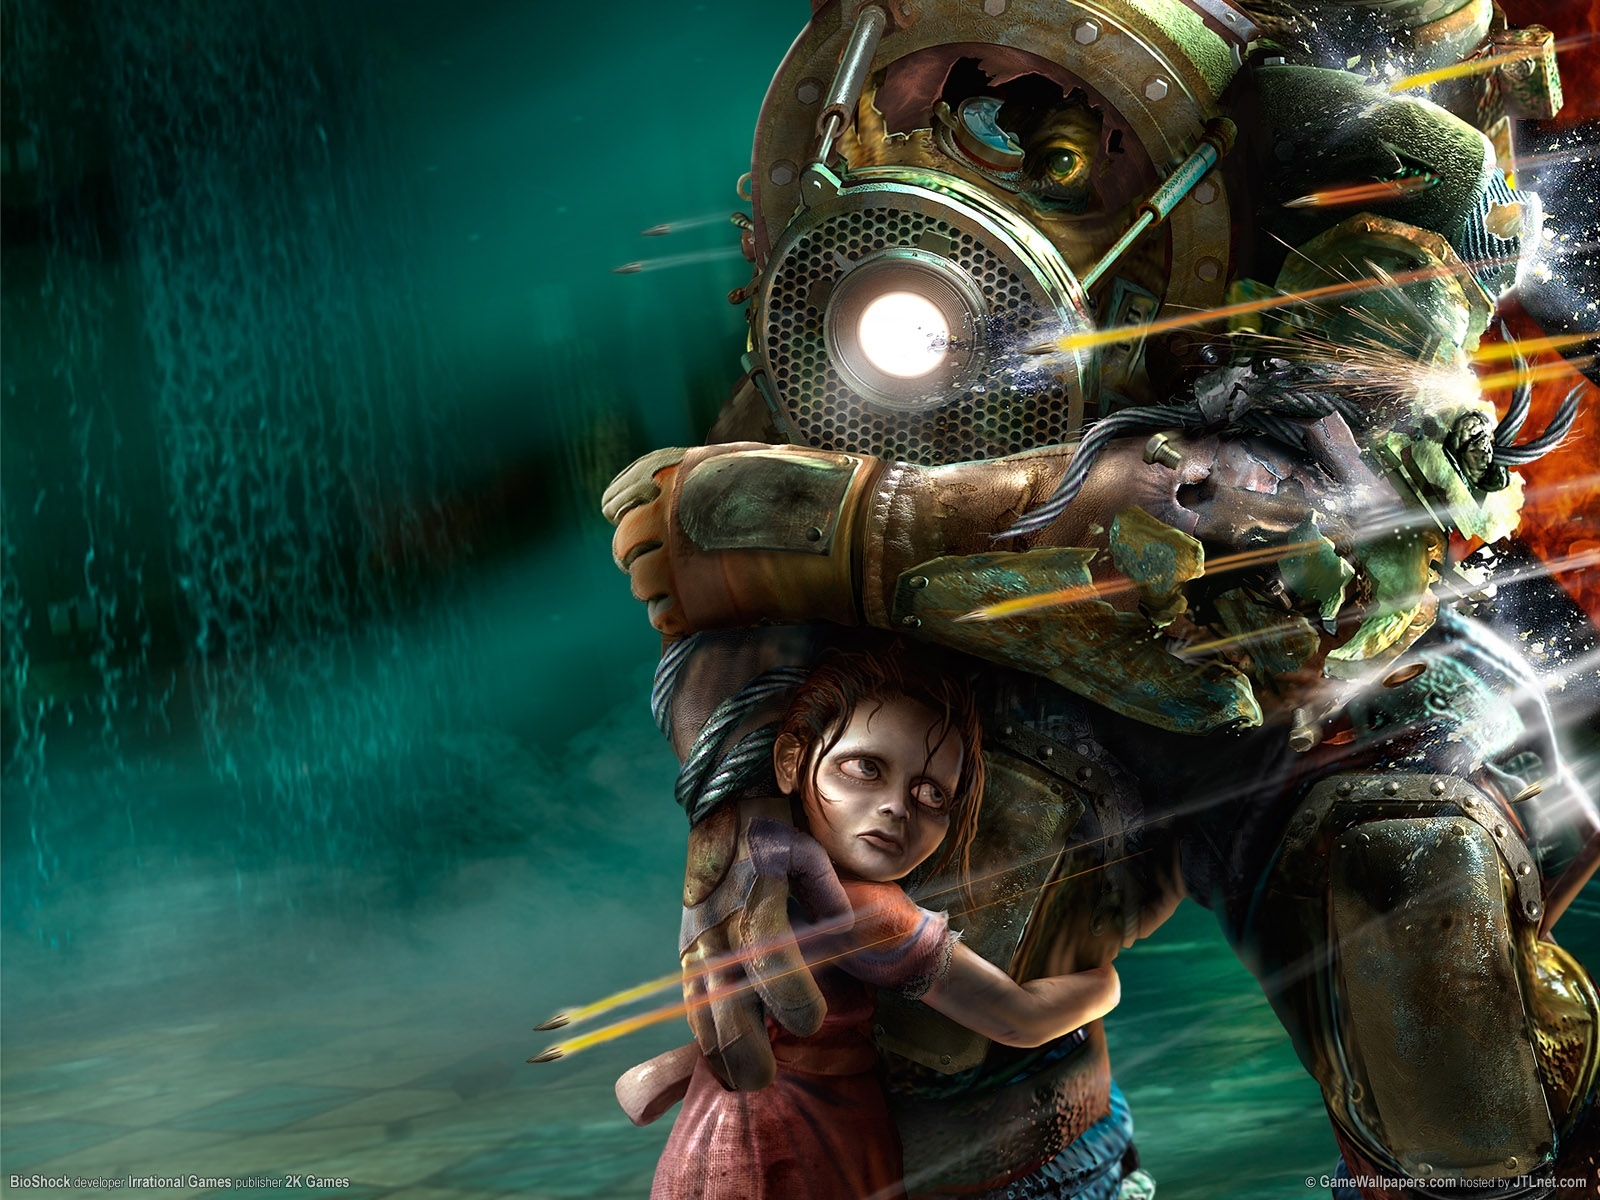 Download Bioshock wallpapers for mobile phone free Bioshock HD pictures